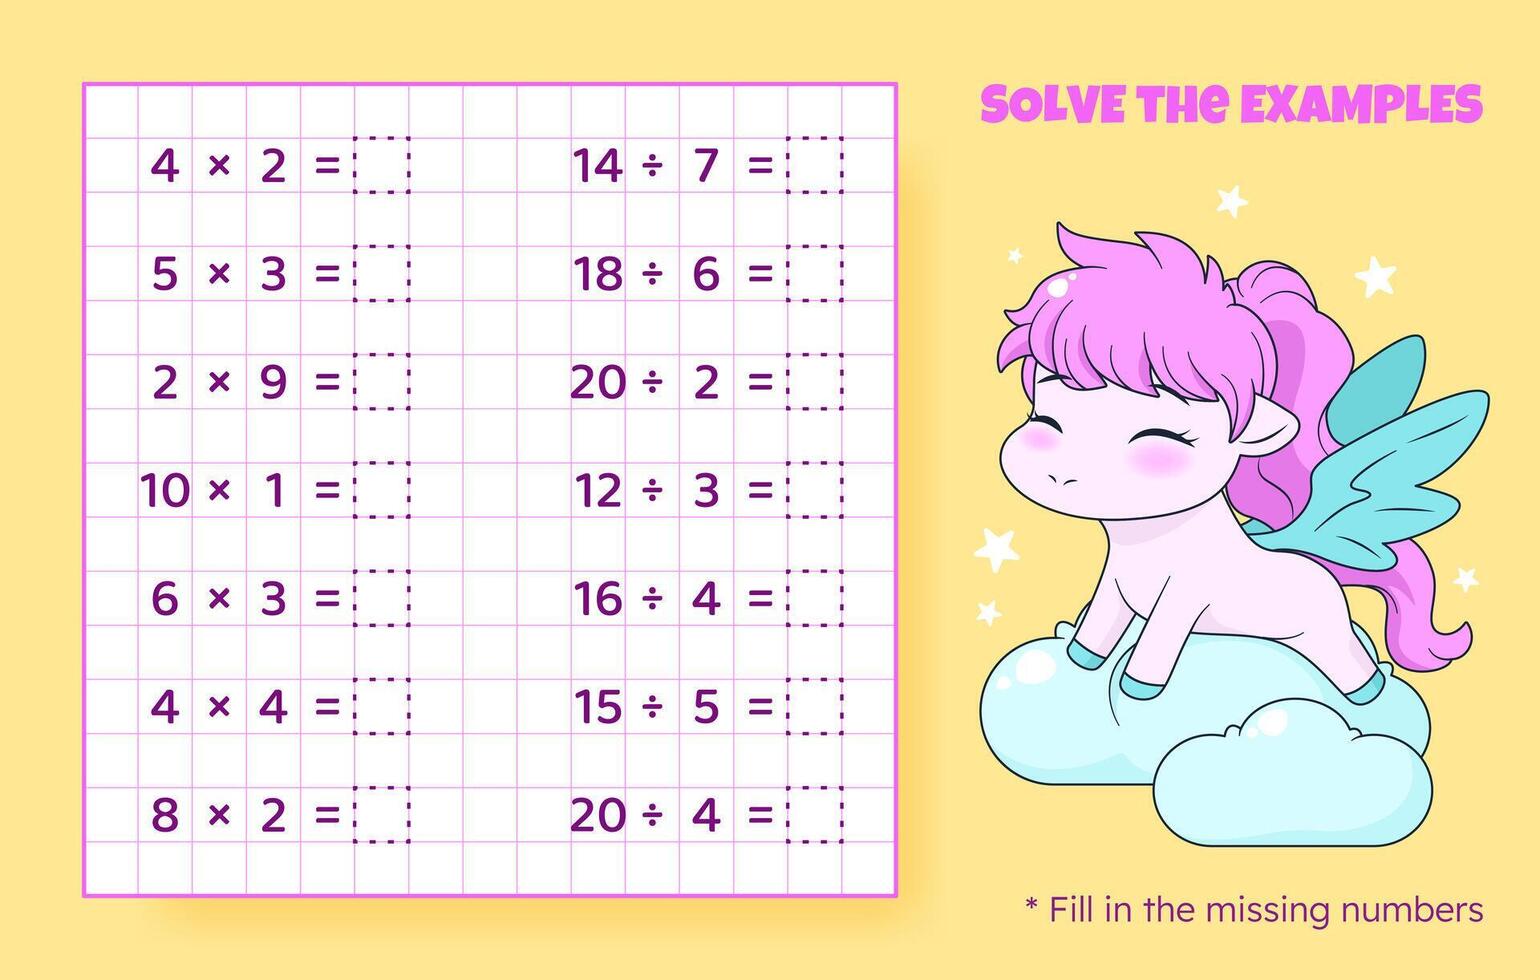 Solve the examples. Multiplication and division up to 20. Mathematical puzzle game. Worksheet for preschool kids. Vector illustration. Cartoon educational game with cute pony for children.